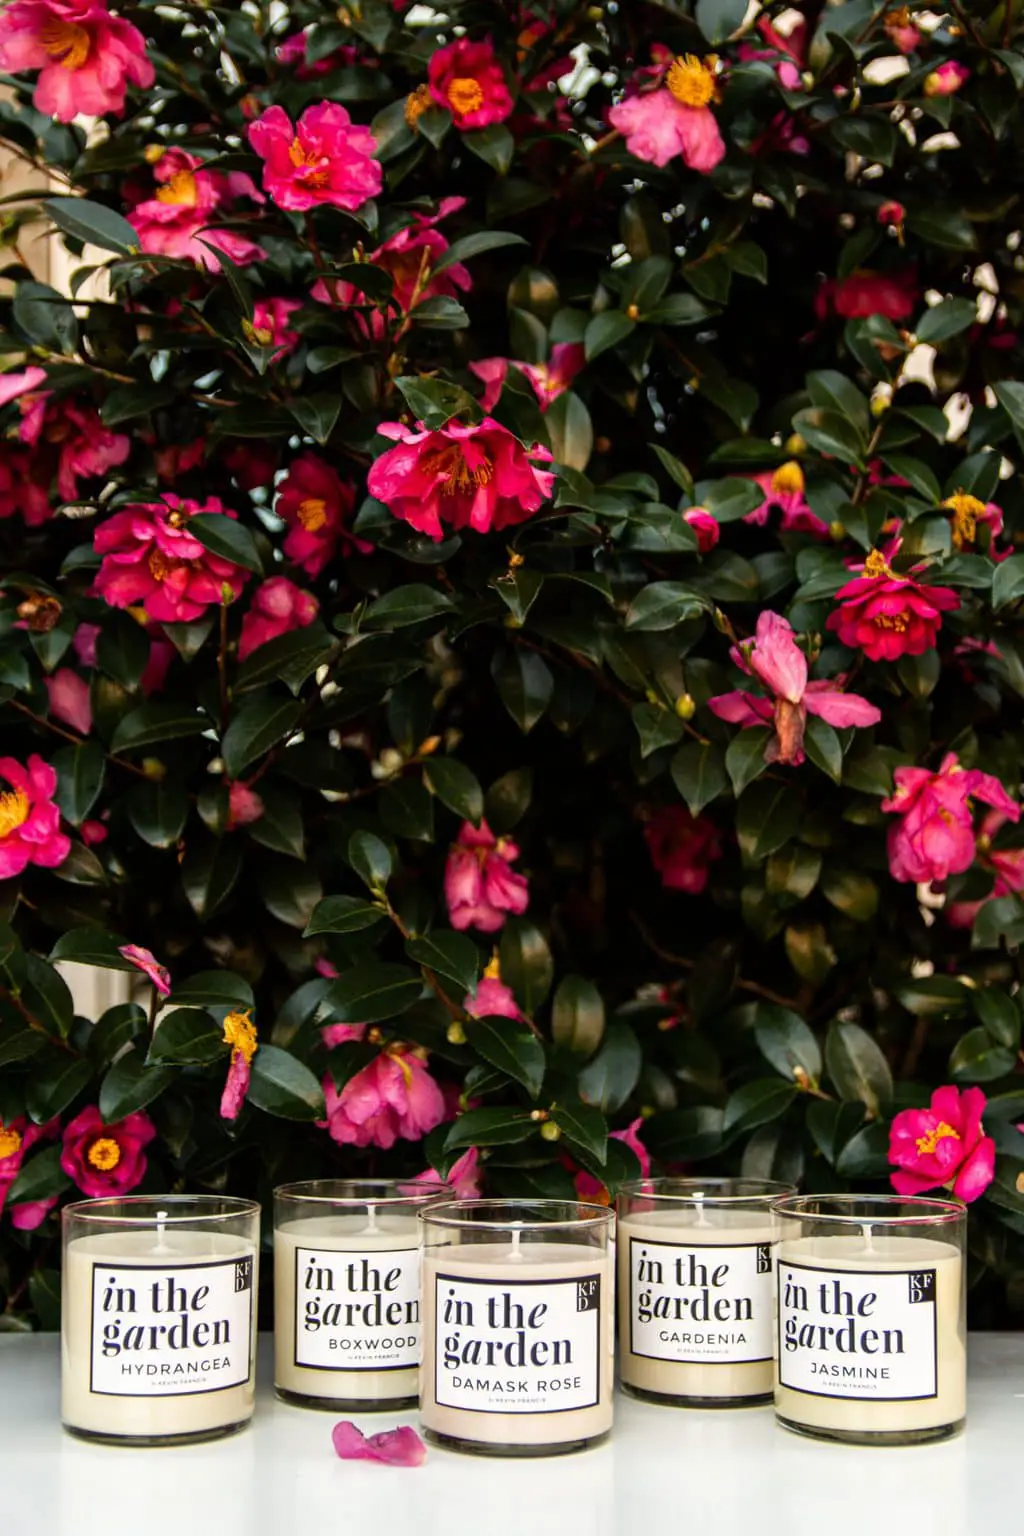 IN THE GARDEN scented candle collection inspired by the traditional Southern garden with boxwood, hydrangea, jasmine, damask rose, and jasmine by Kevin Francis Design #southerngarden #garden #gardening #candles #scentedcandle